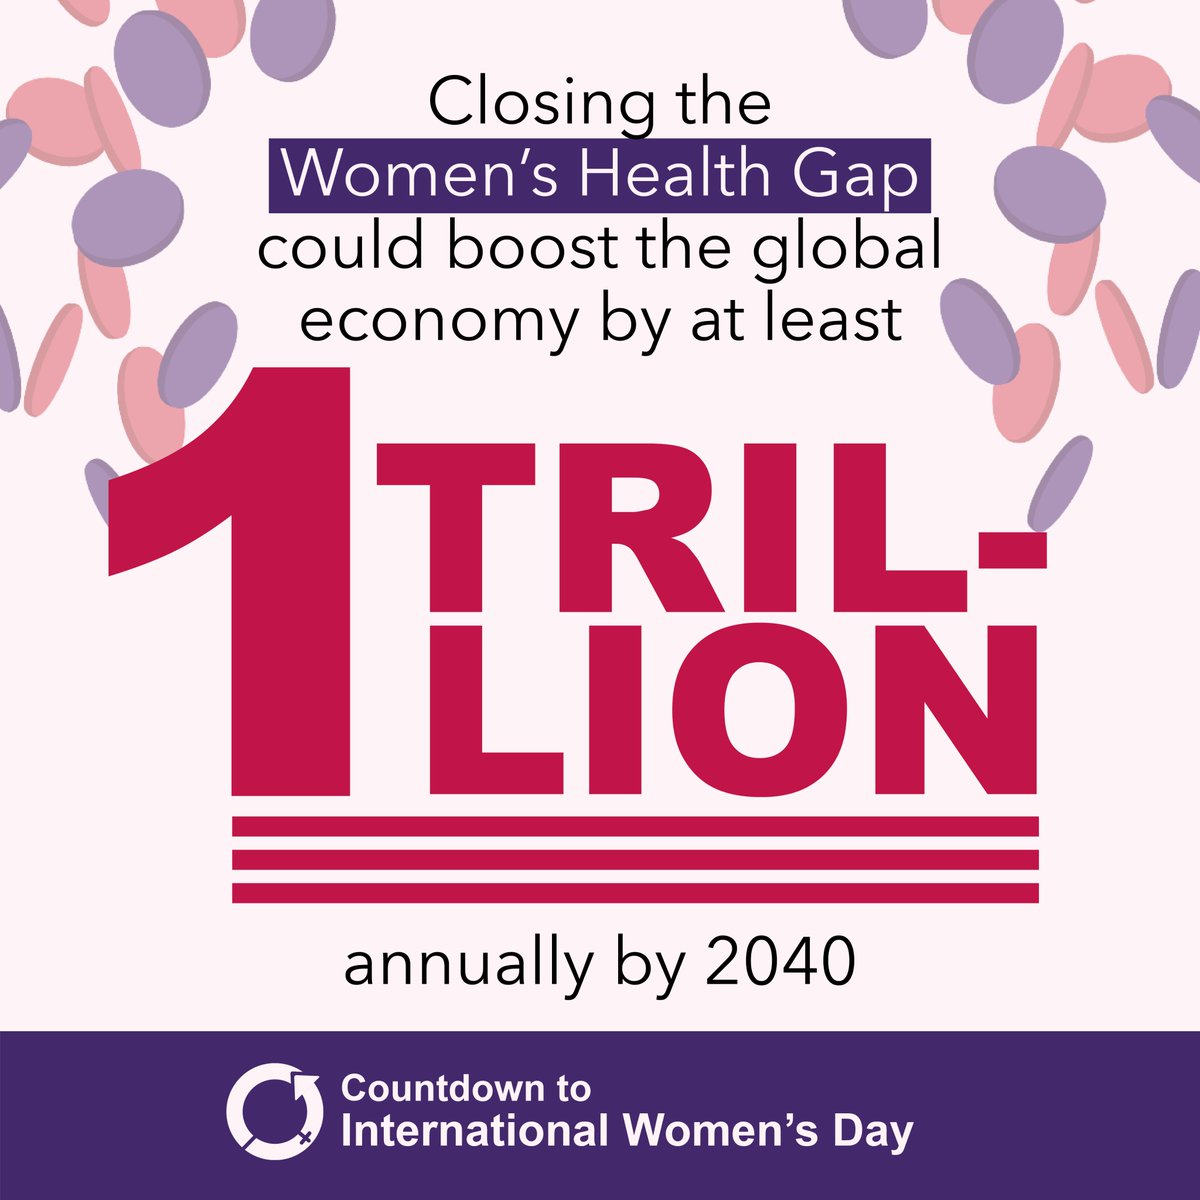 Closing the women's health gap could boost the global economy by $1 trillion annually by 2040! Check out the recent report by World Economic Forum and McKinsey Health Institute to learn more: bit.ly/4cf9jpl #InternationalWomensDay #CloseTheWomensHealthGap